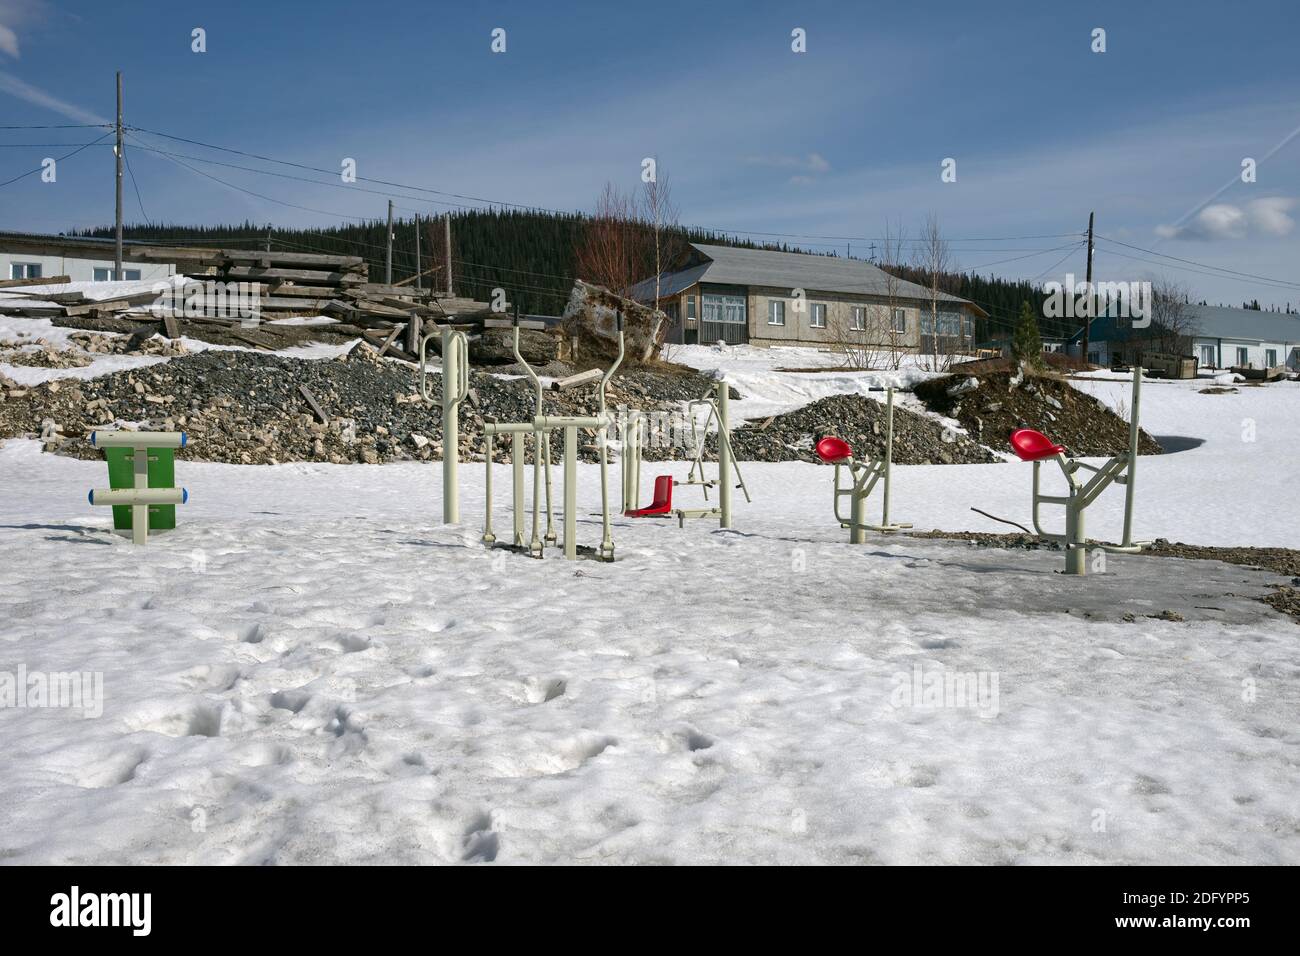 Sports simulators thaw out from under the snow in a village street in the spring. Stock Photo